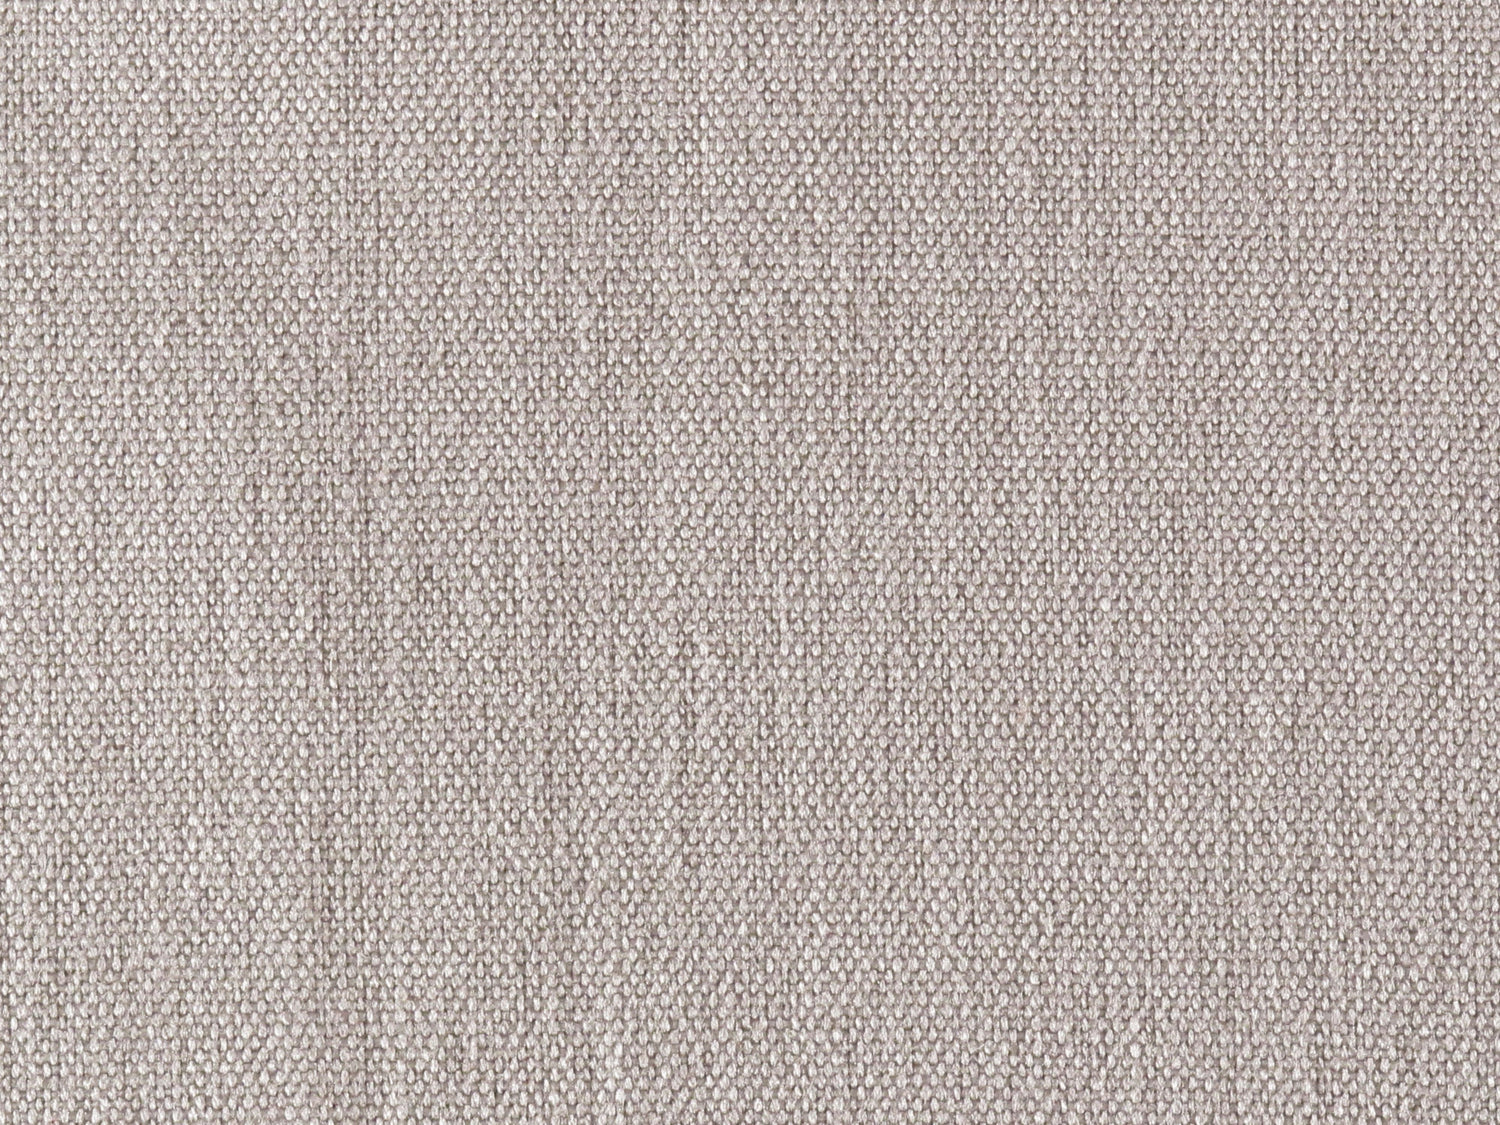 Lakeside Linen fabric in taupe color - pattern number PK 0014LAKE - by Scalamandre in the Old World Weavers collection